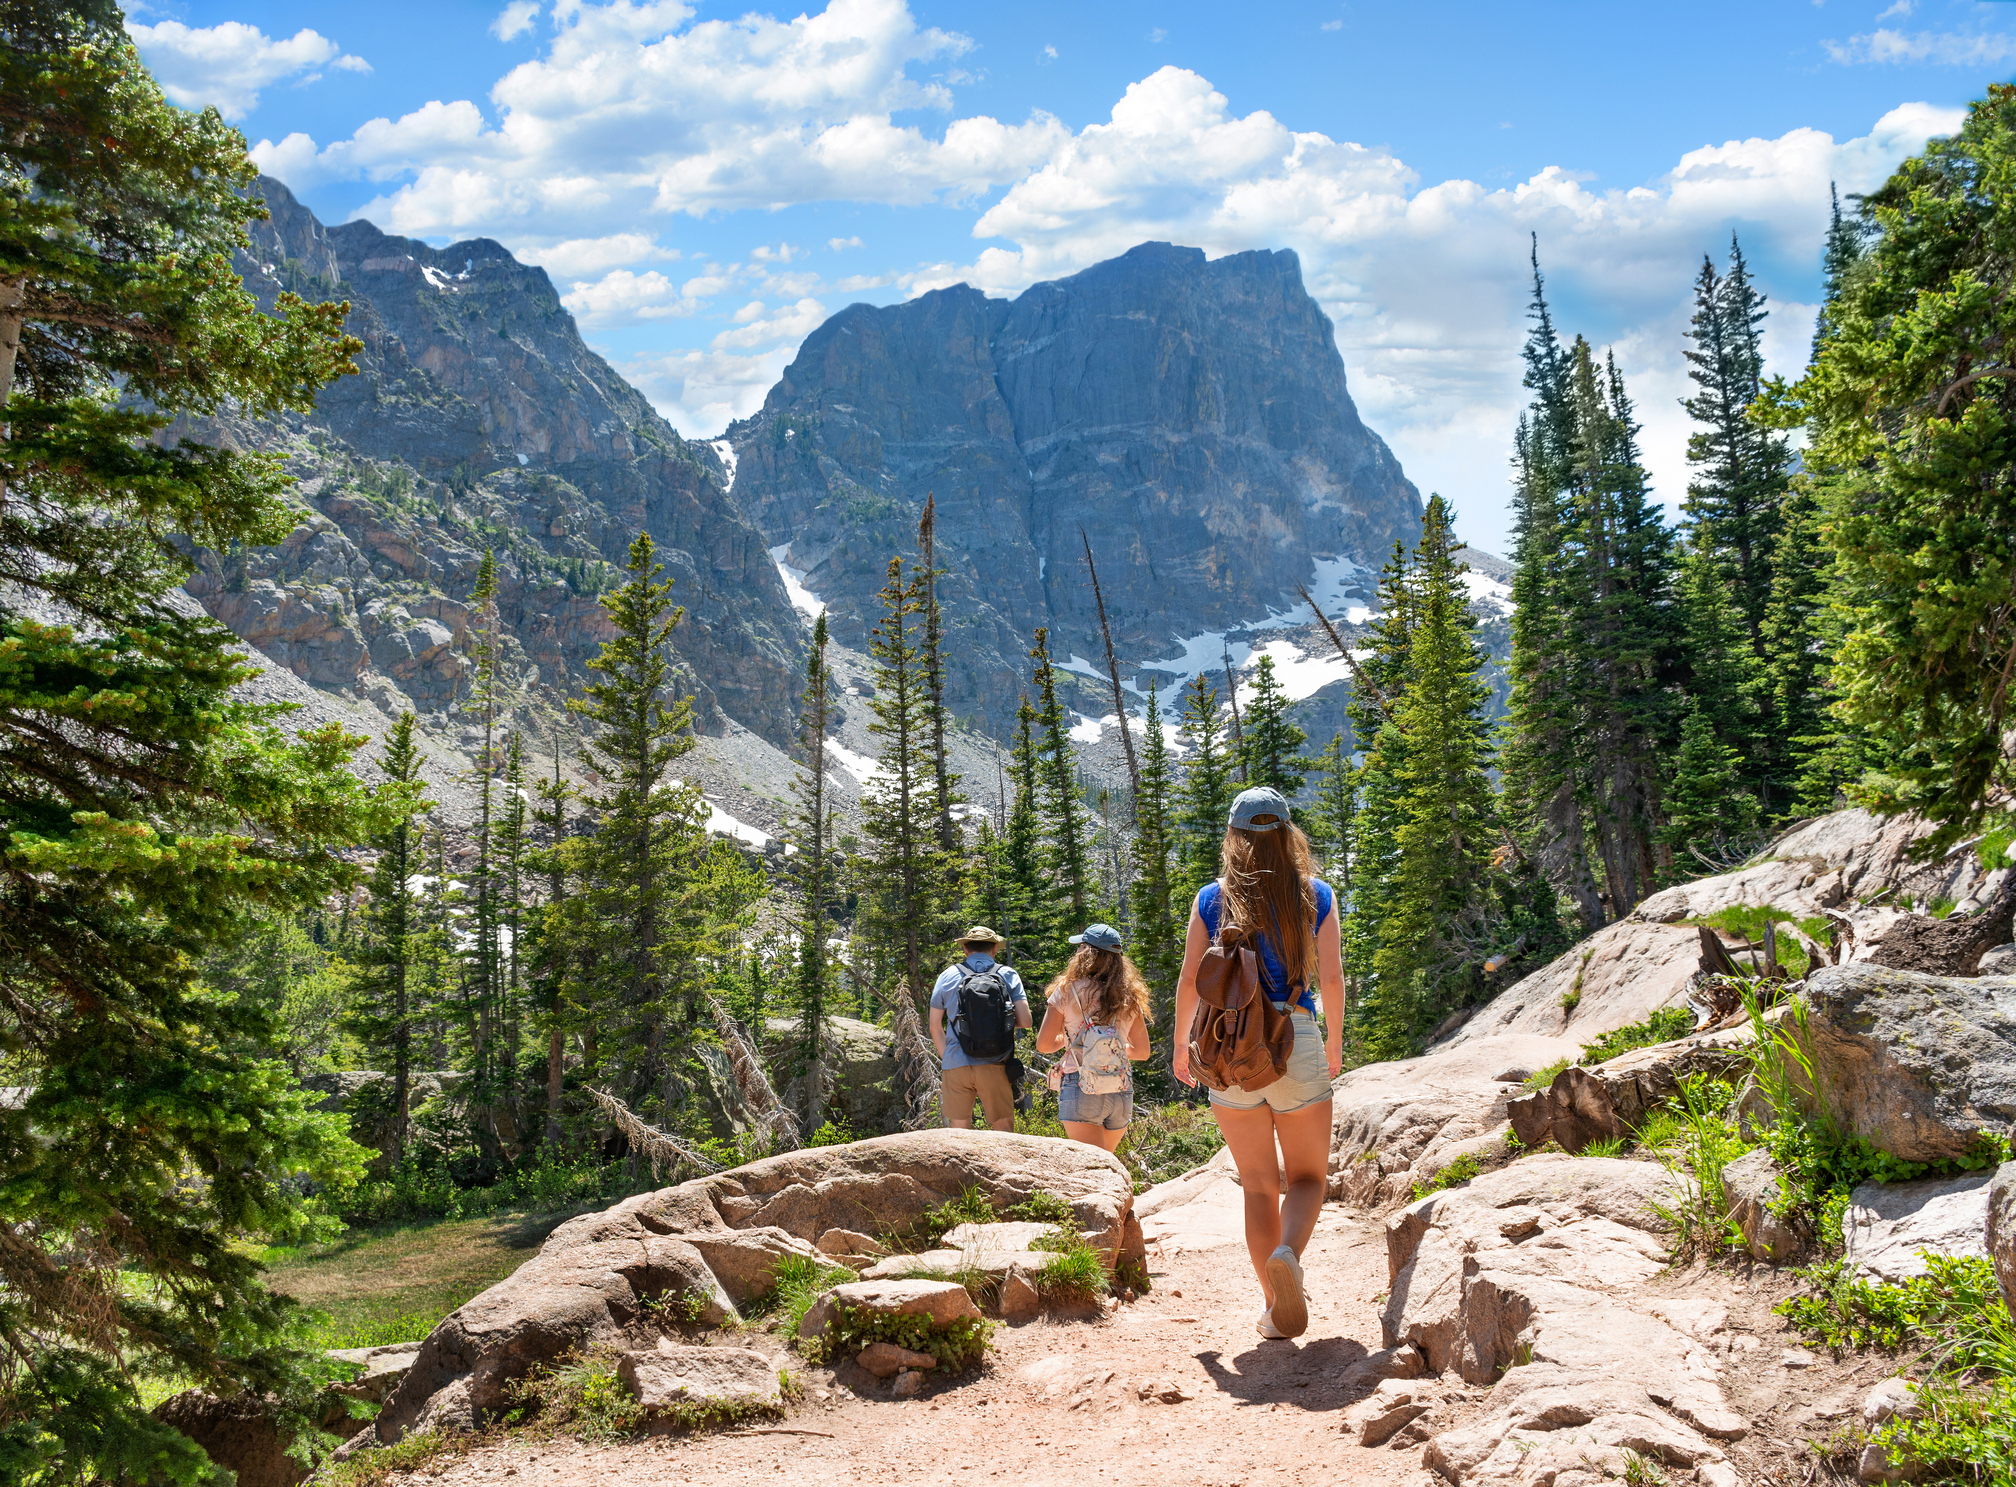 Safety Tips For Mountain Trips